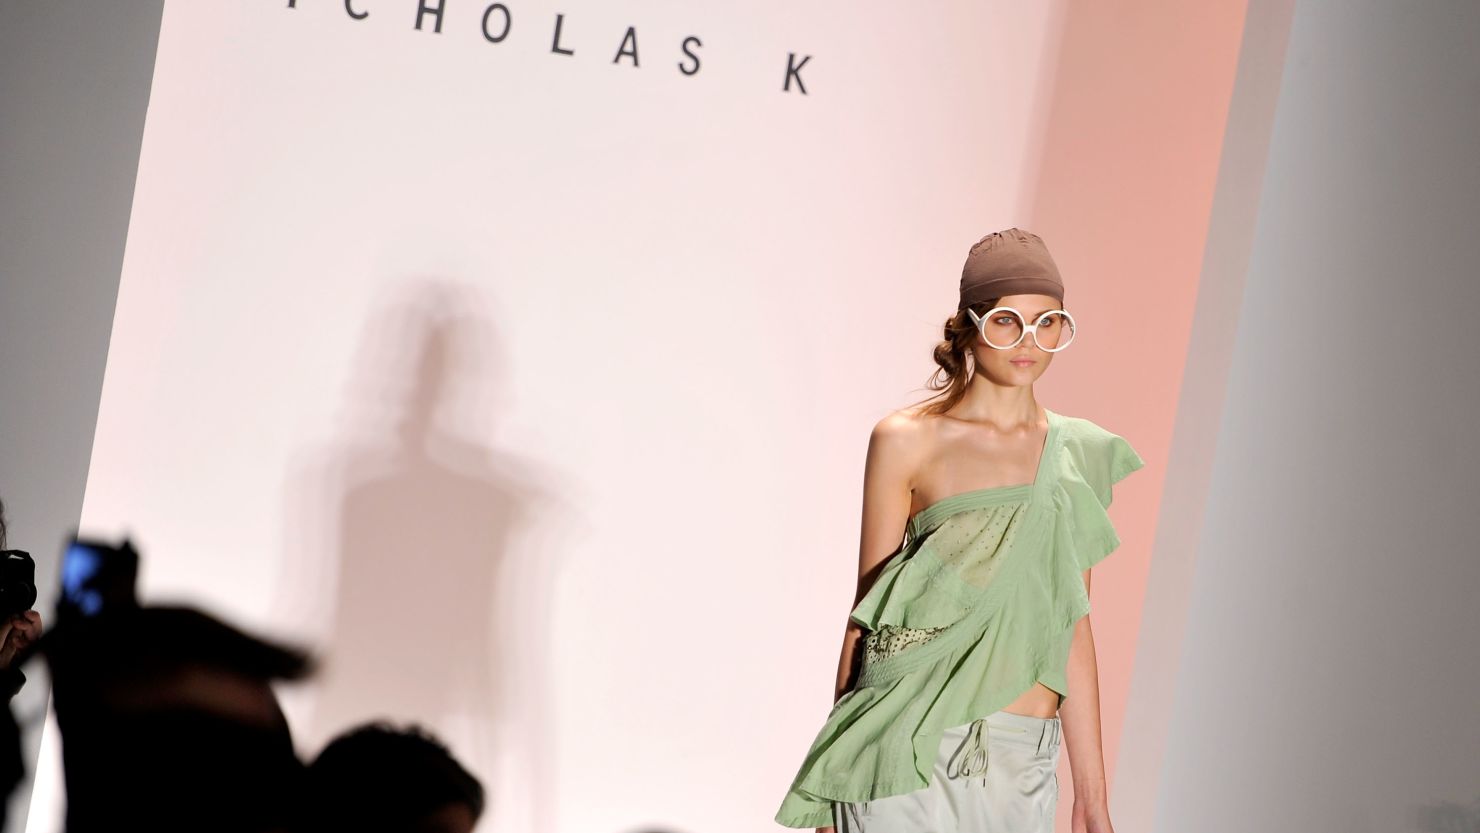  Will the sexy cutouts and sheer overlays seen in this Nicholas K runway show make it into your closet?